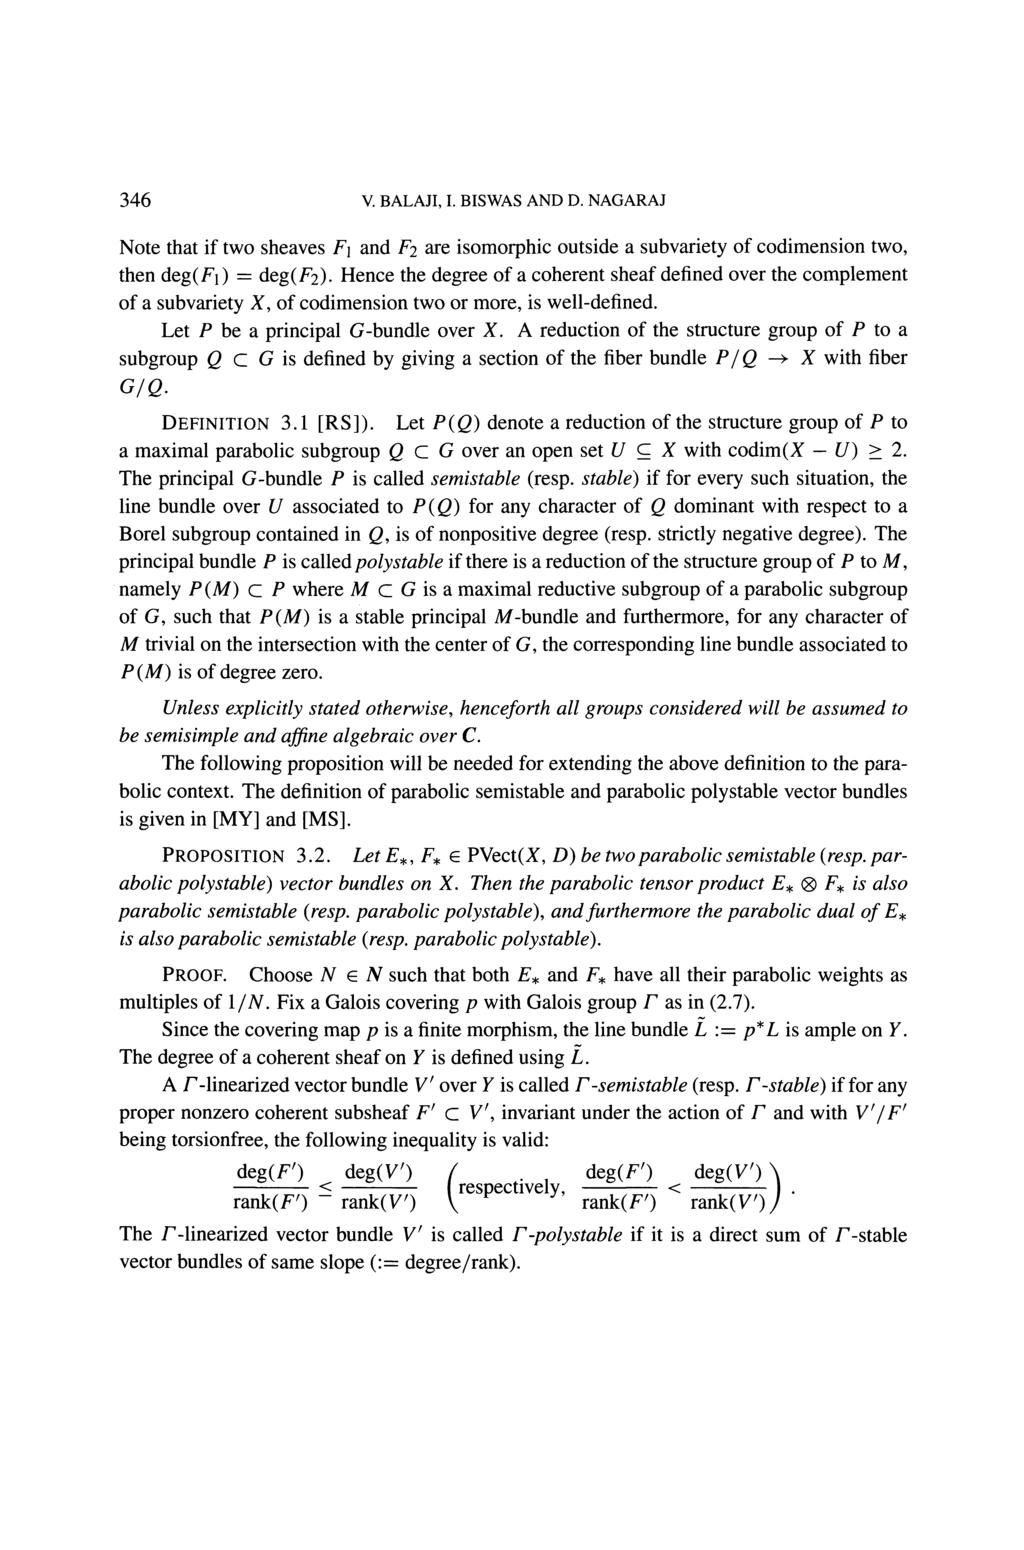 346 V. BALAJI, I. BISWAS AND D. NAGARAJ Note that if two sheaves F\ and Fi are isomorphic outside a subvariety of codimension two, then deg(fi) = deg(/<2).